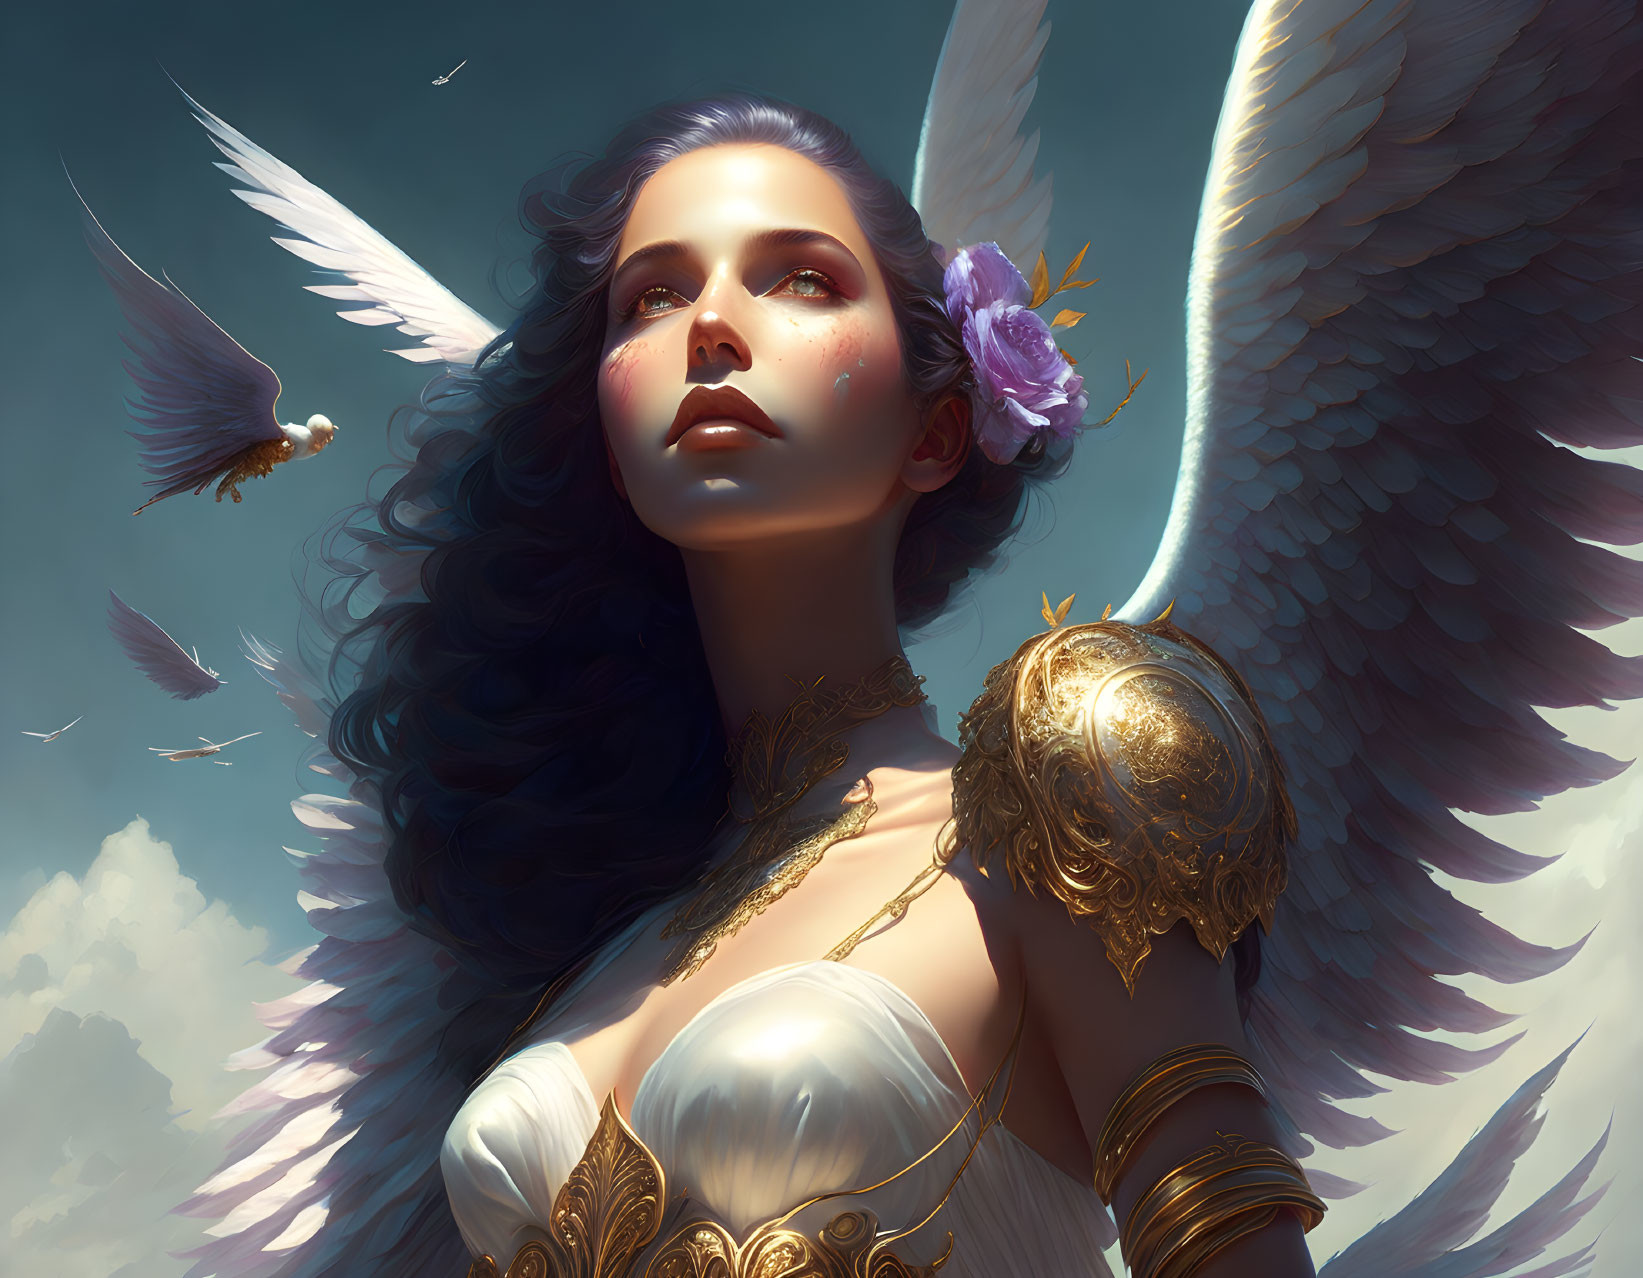 Majestic woman with angelic wings and golden armor gazing skyward among soaring birds on cloudy